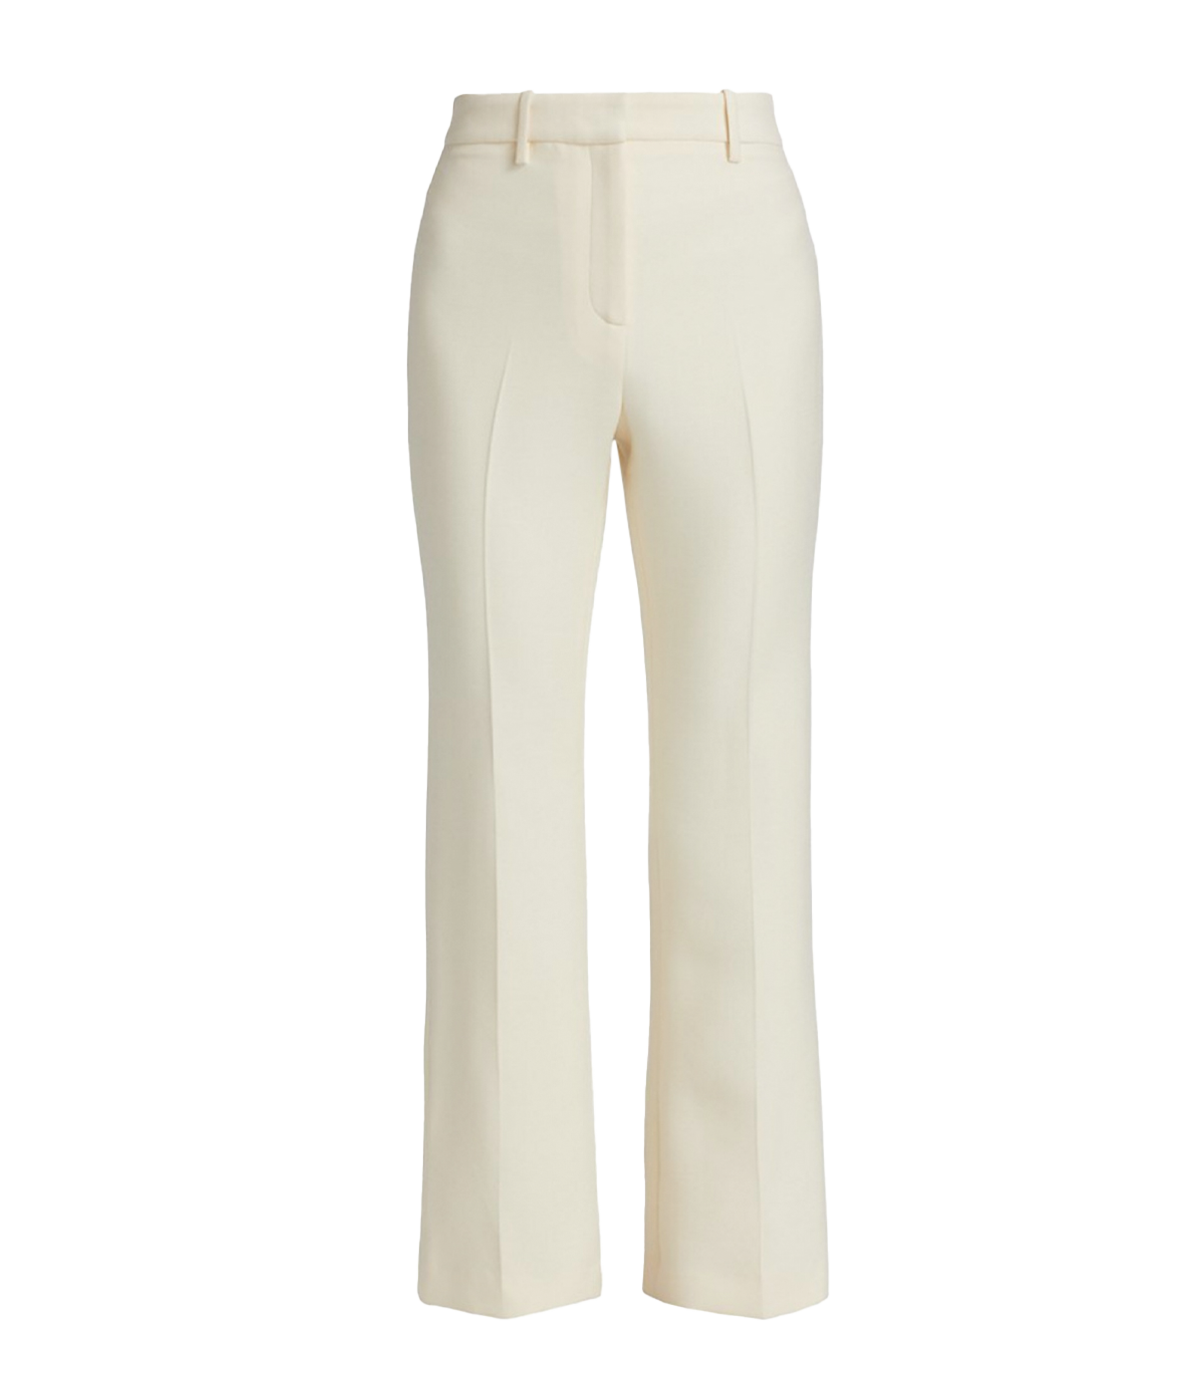 Cropped Corette Pant in Ivory